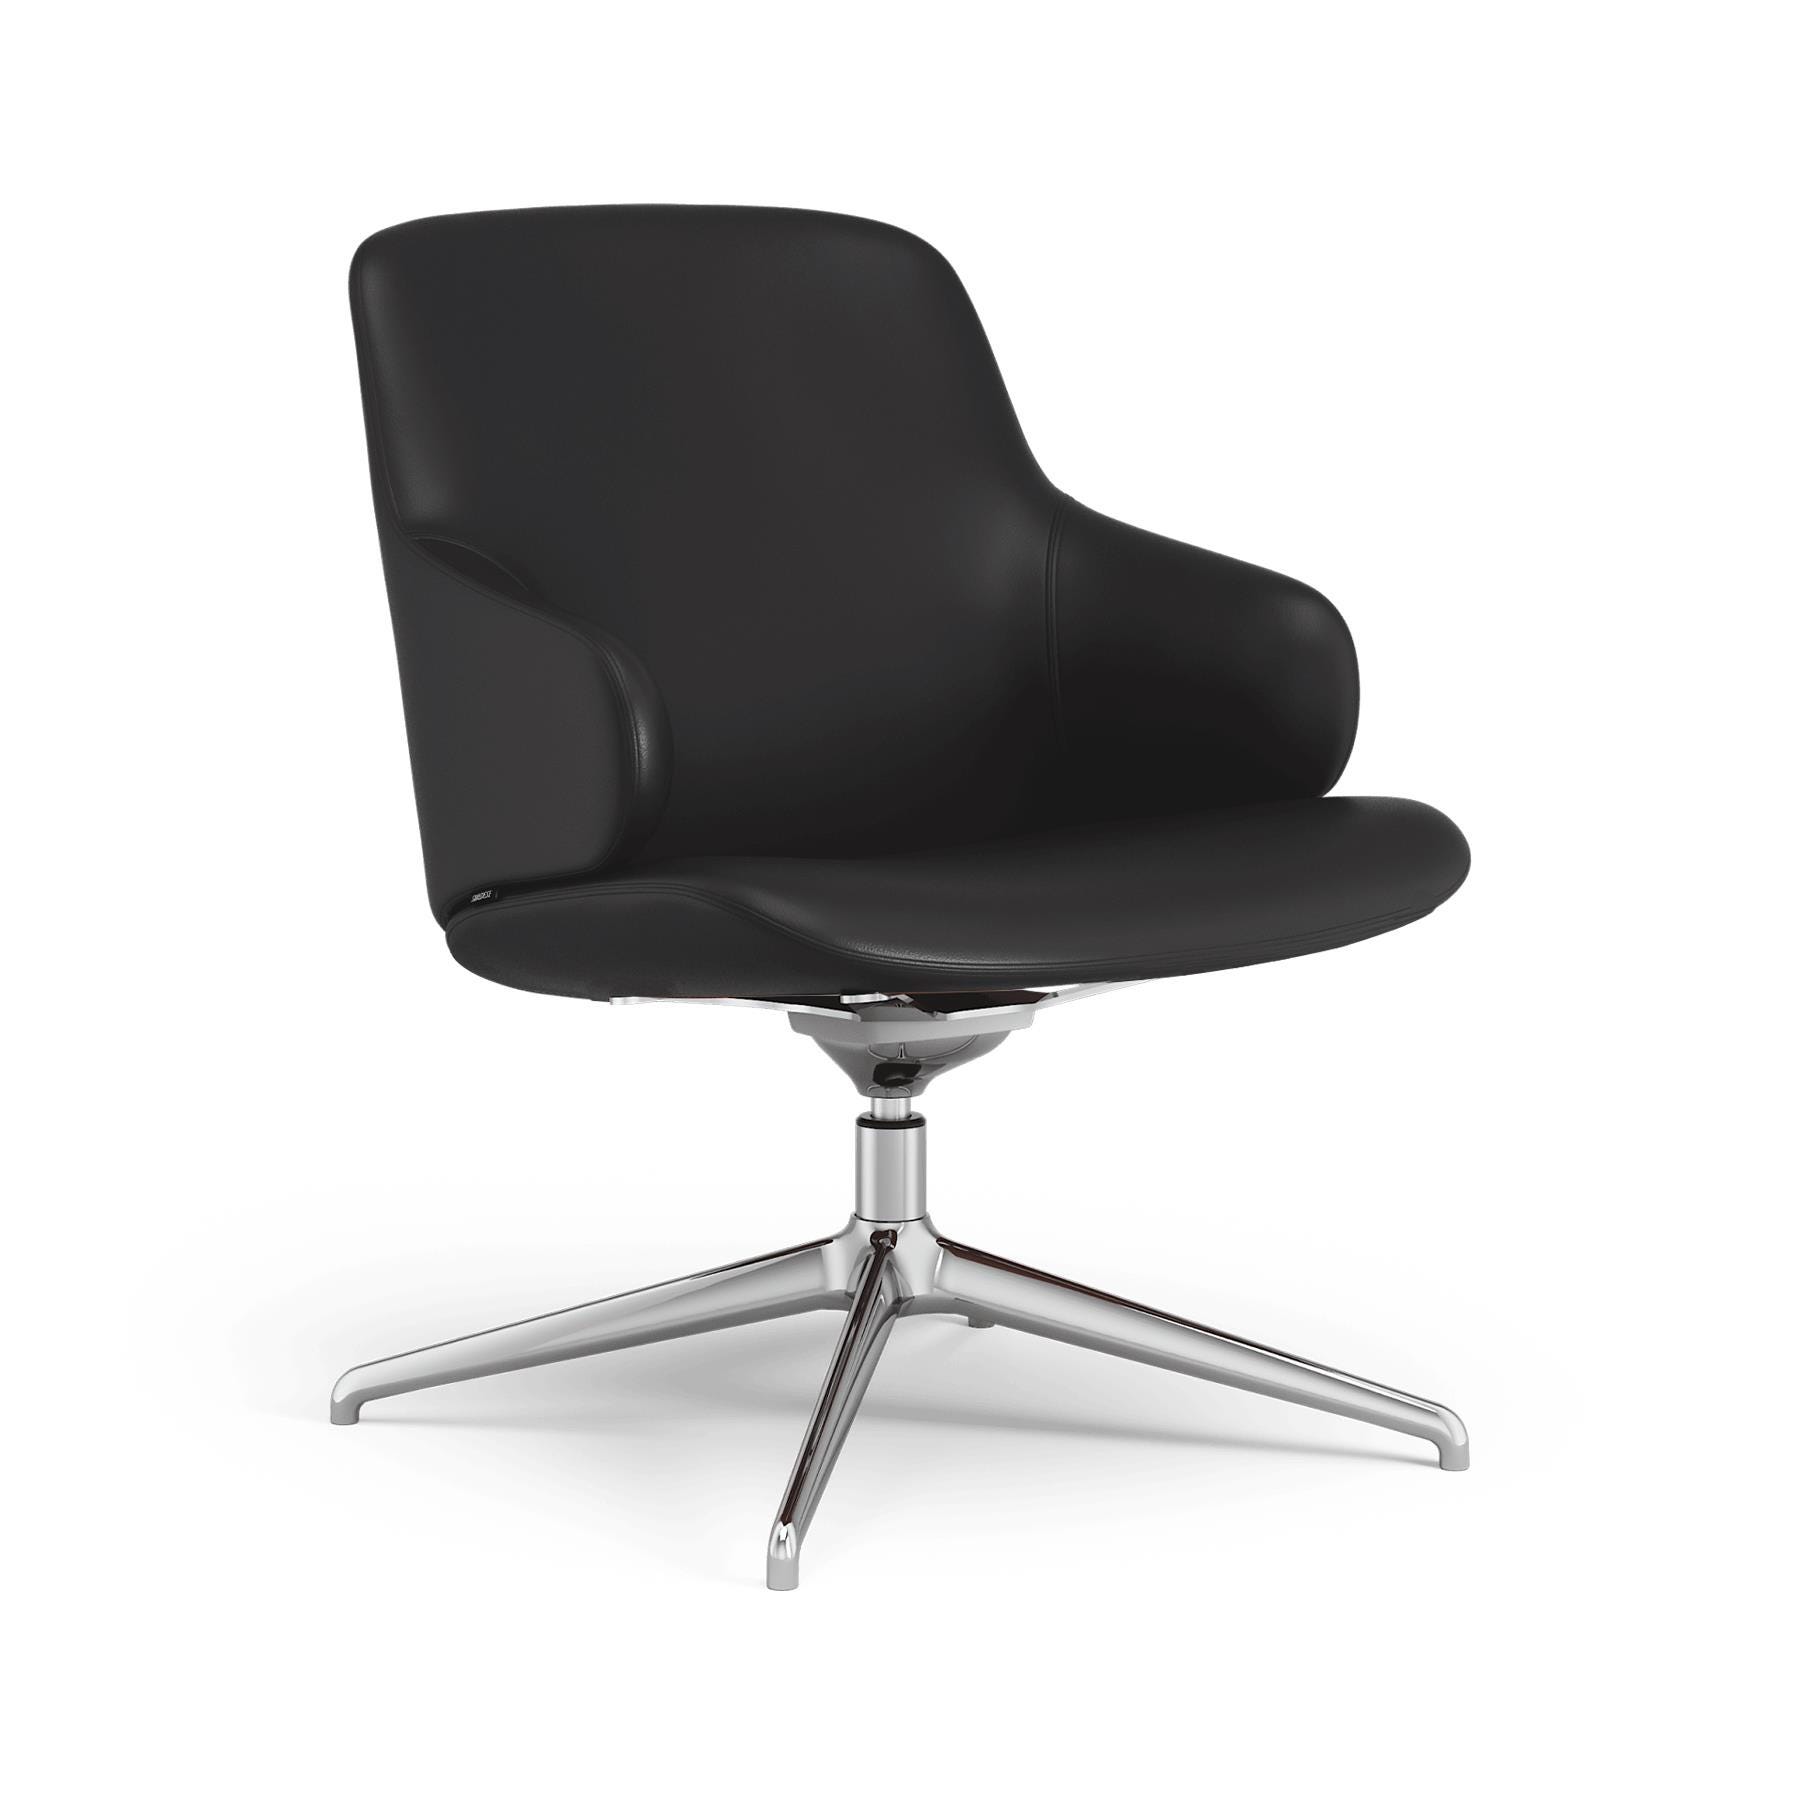 Swedese Amstelle Easy Chair Swivel Polished Aluminium Soft Black Leather Designer Furniture From Holloways Of Ludlow